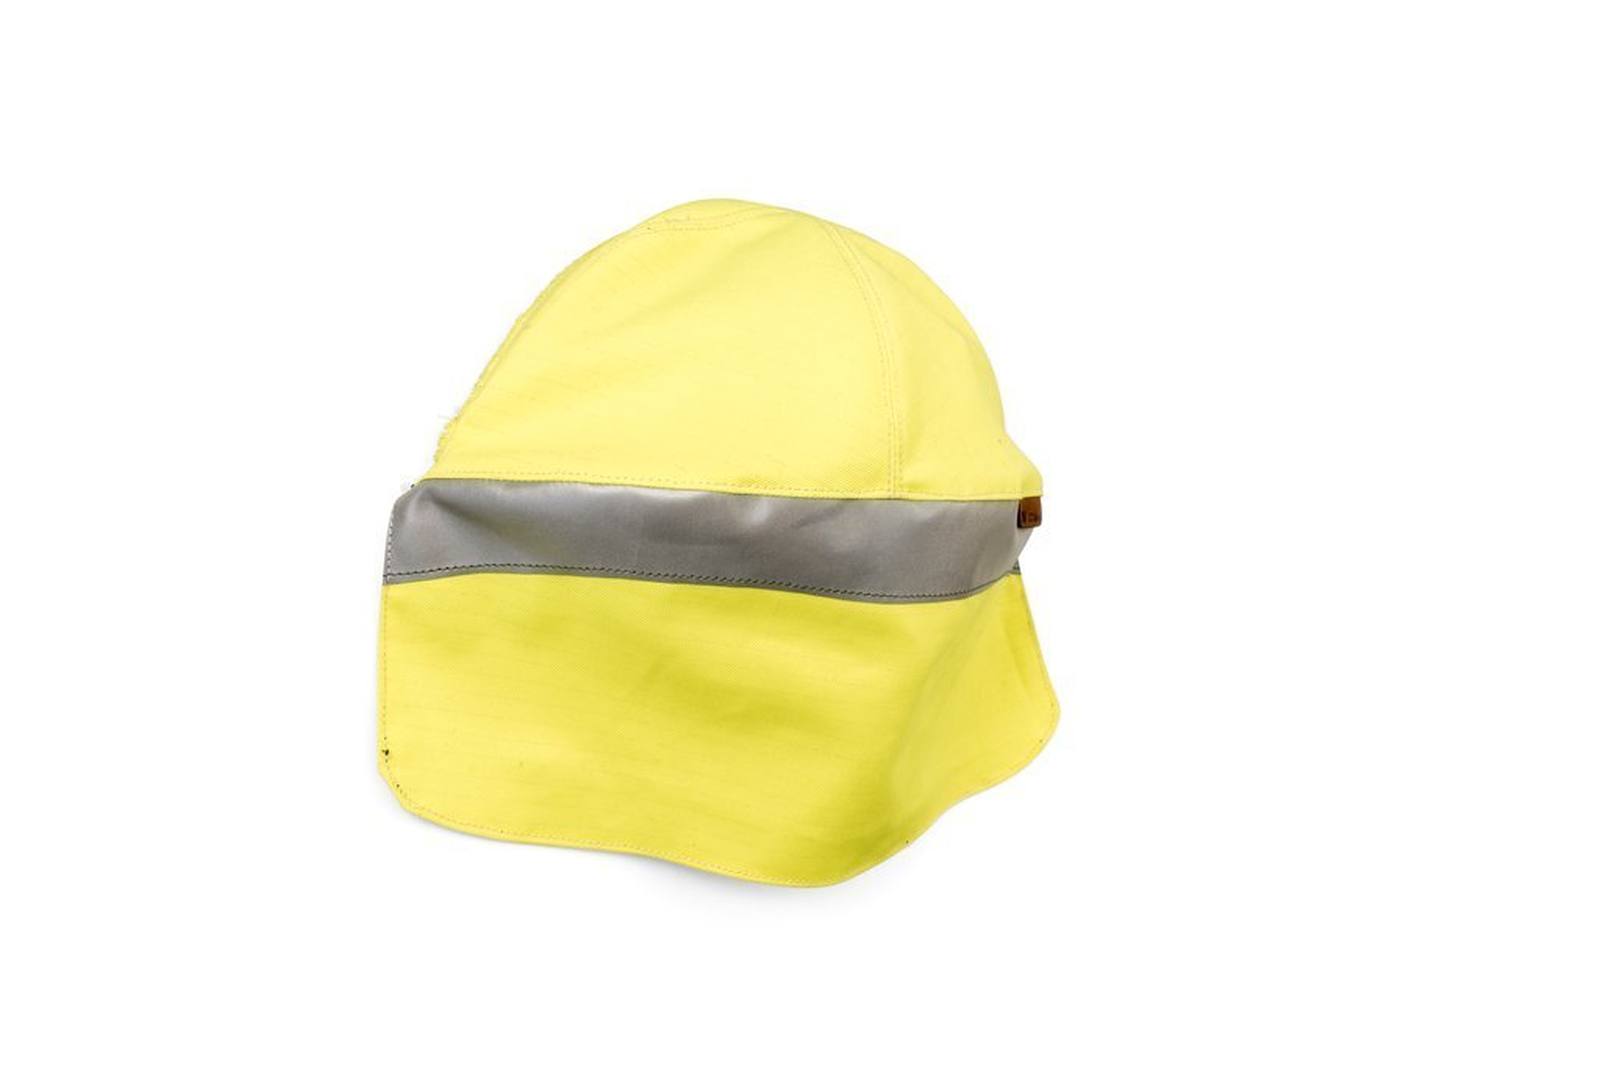 3M fluorescent yellow fabric head protection for 3M Speedglas High-performance welding mask G5-01, H169021